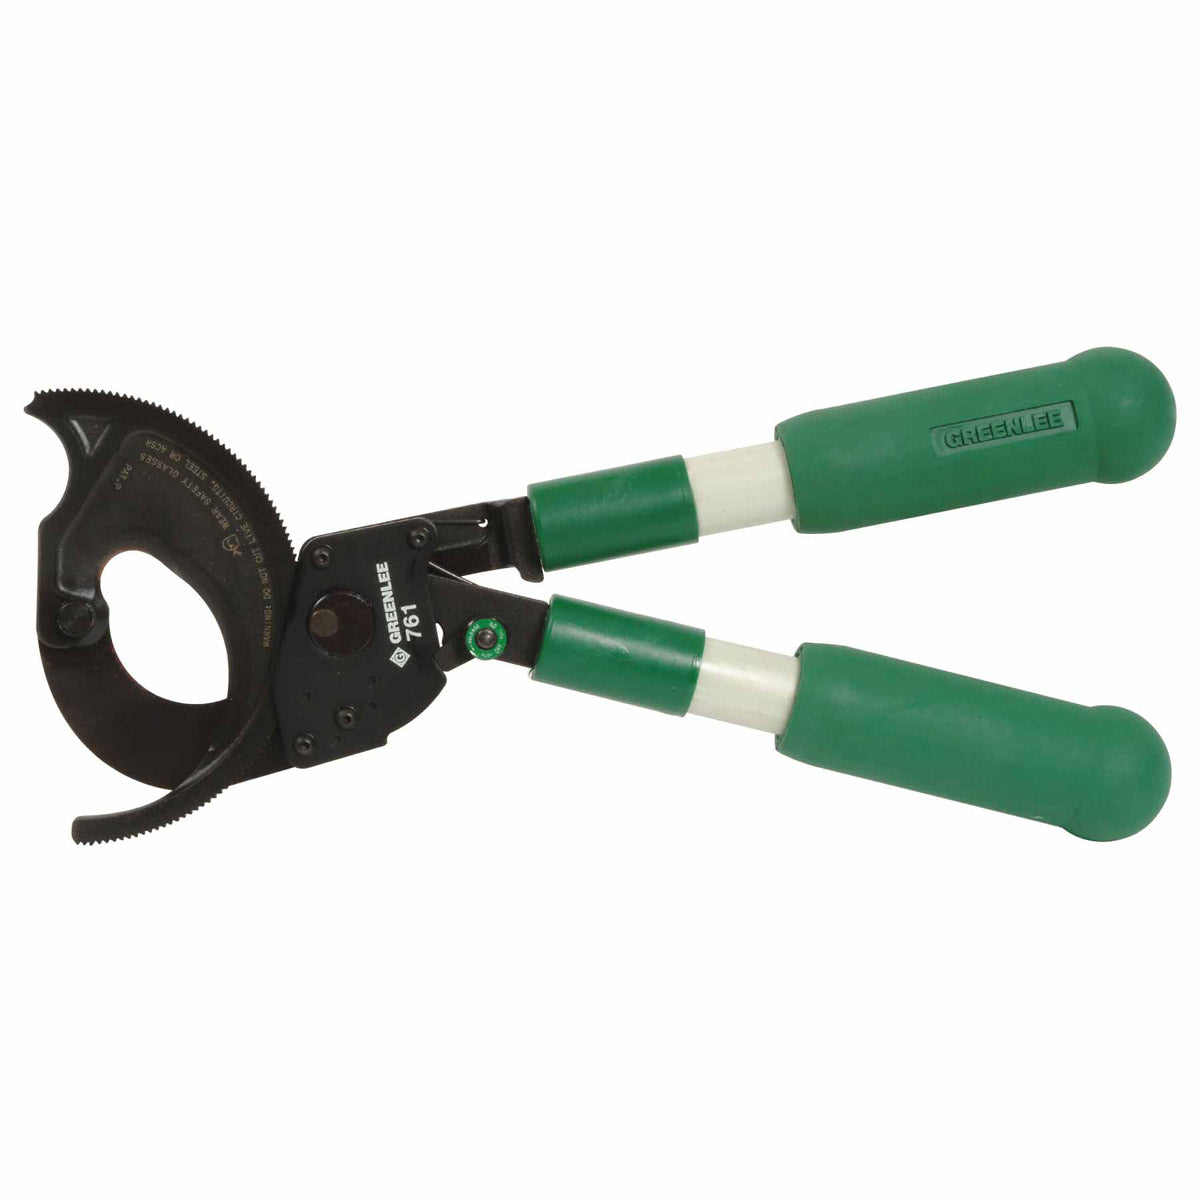 Greenlee 761 Two-Hand Ratchet Cable Cutter